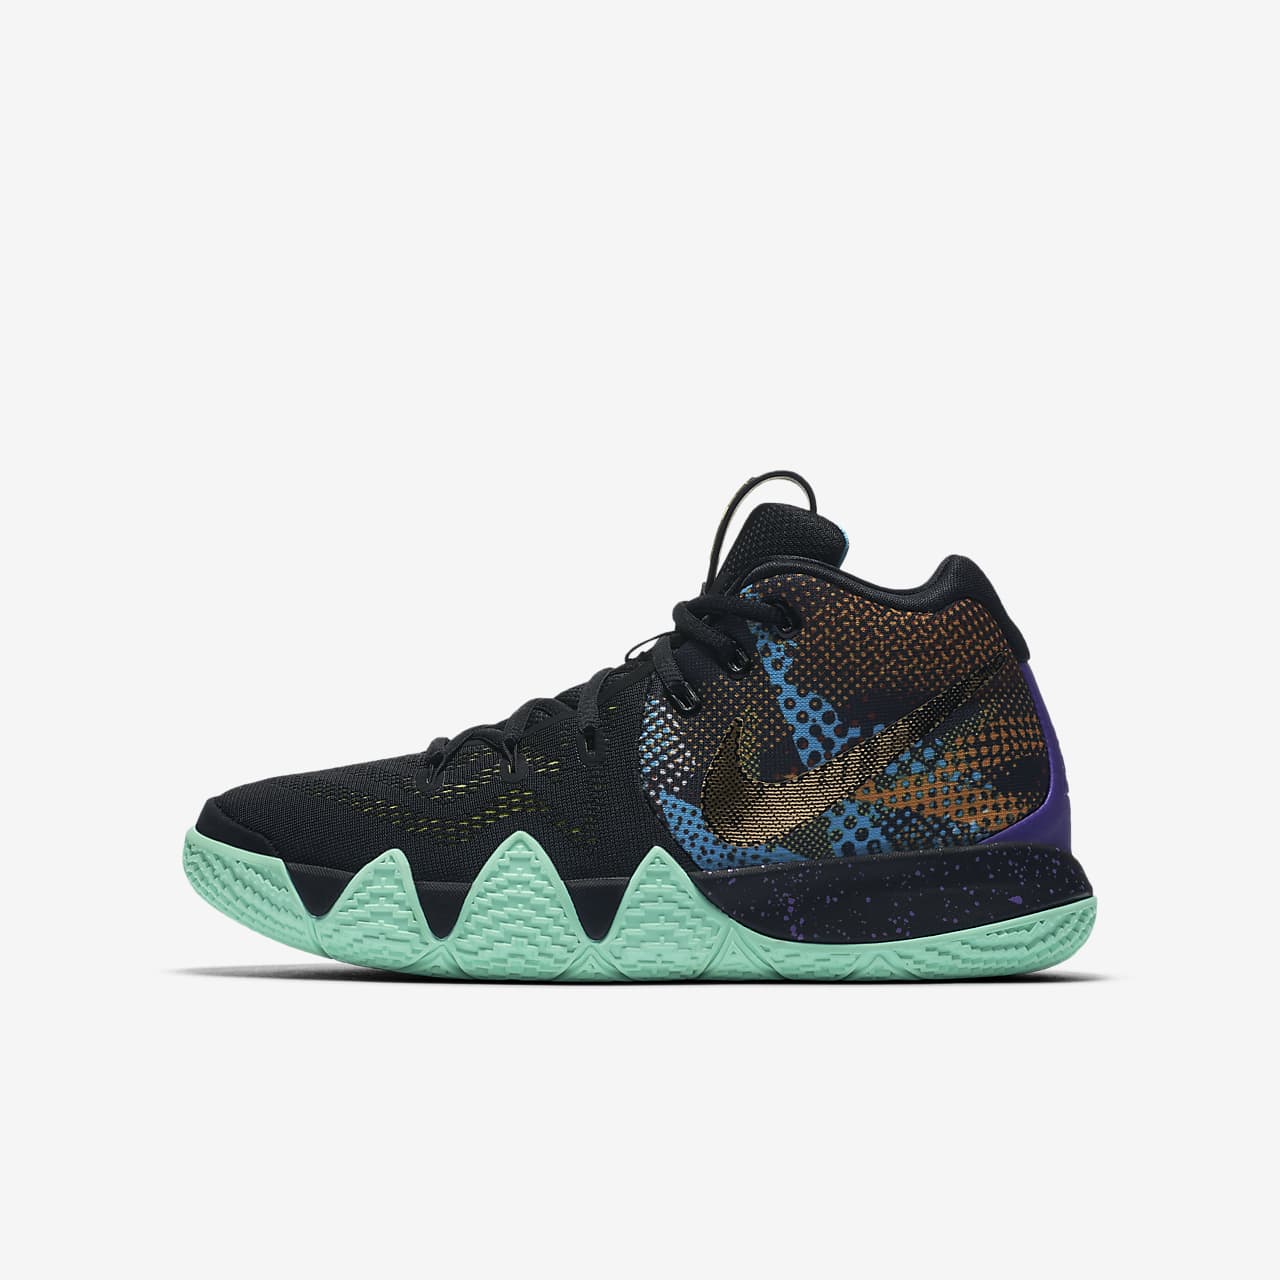 kyrie 4 outsole